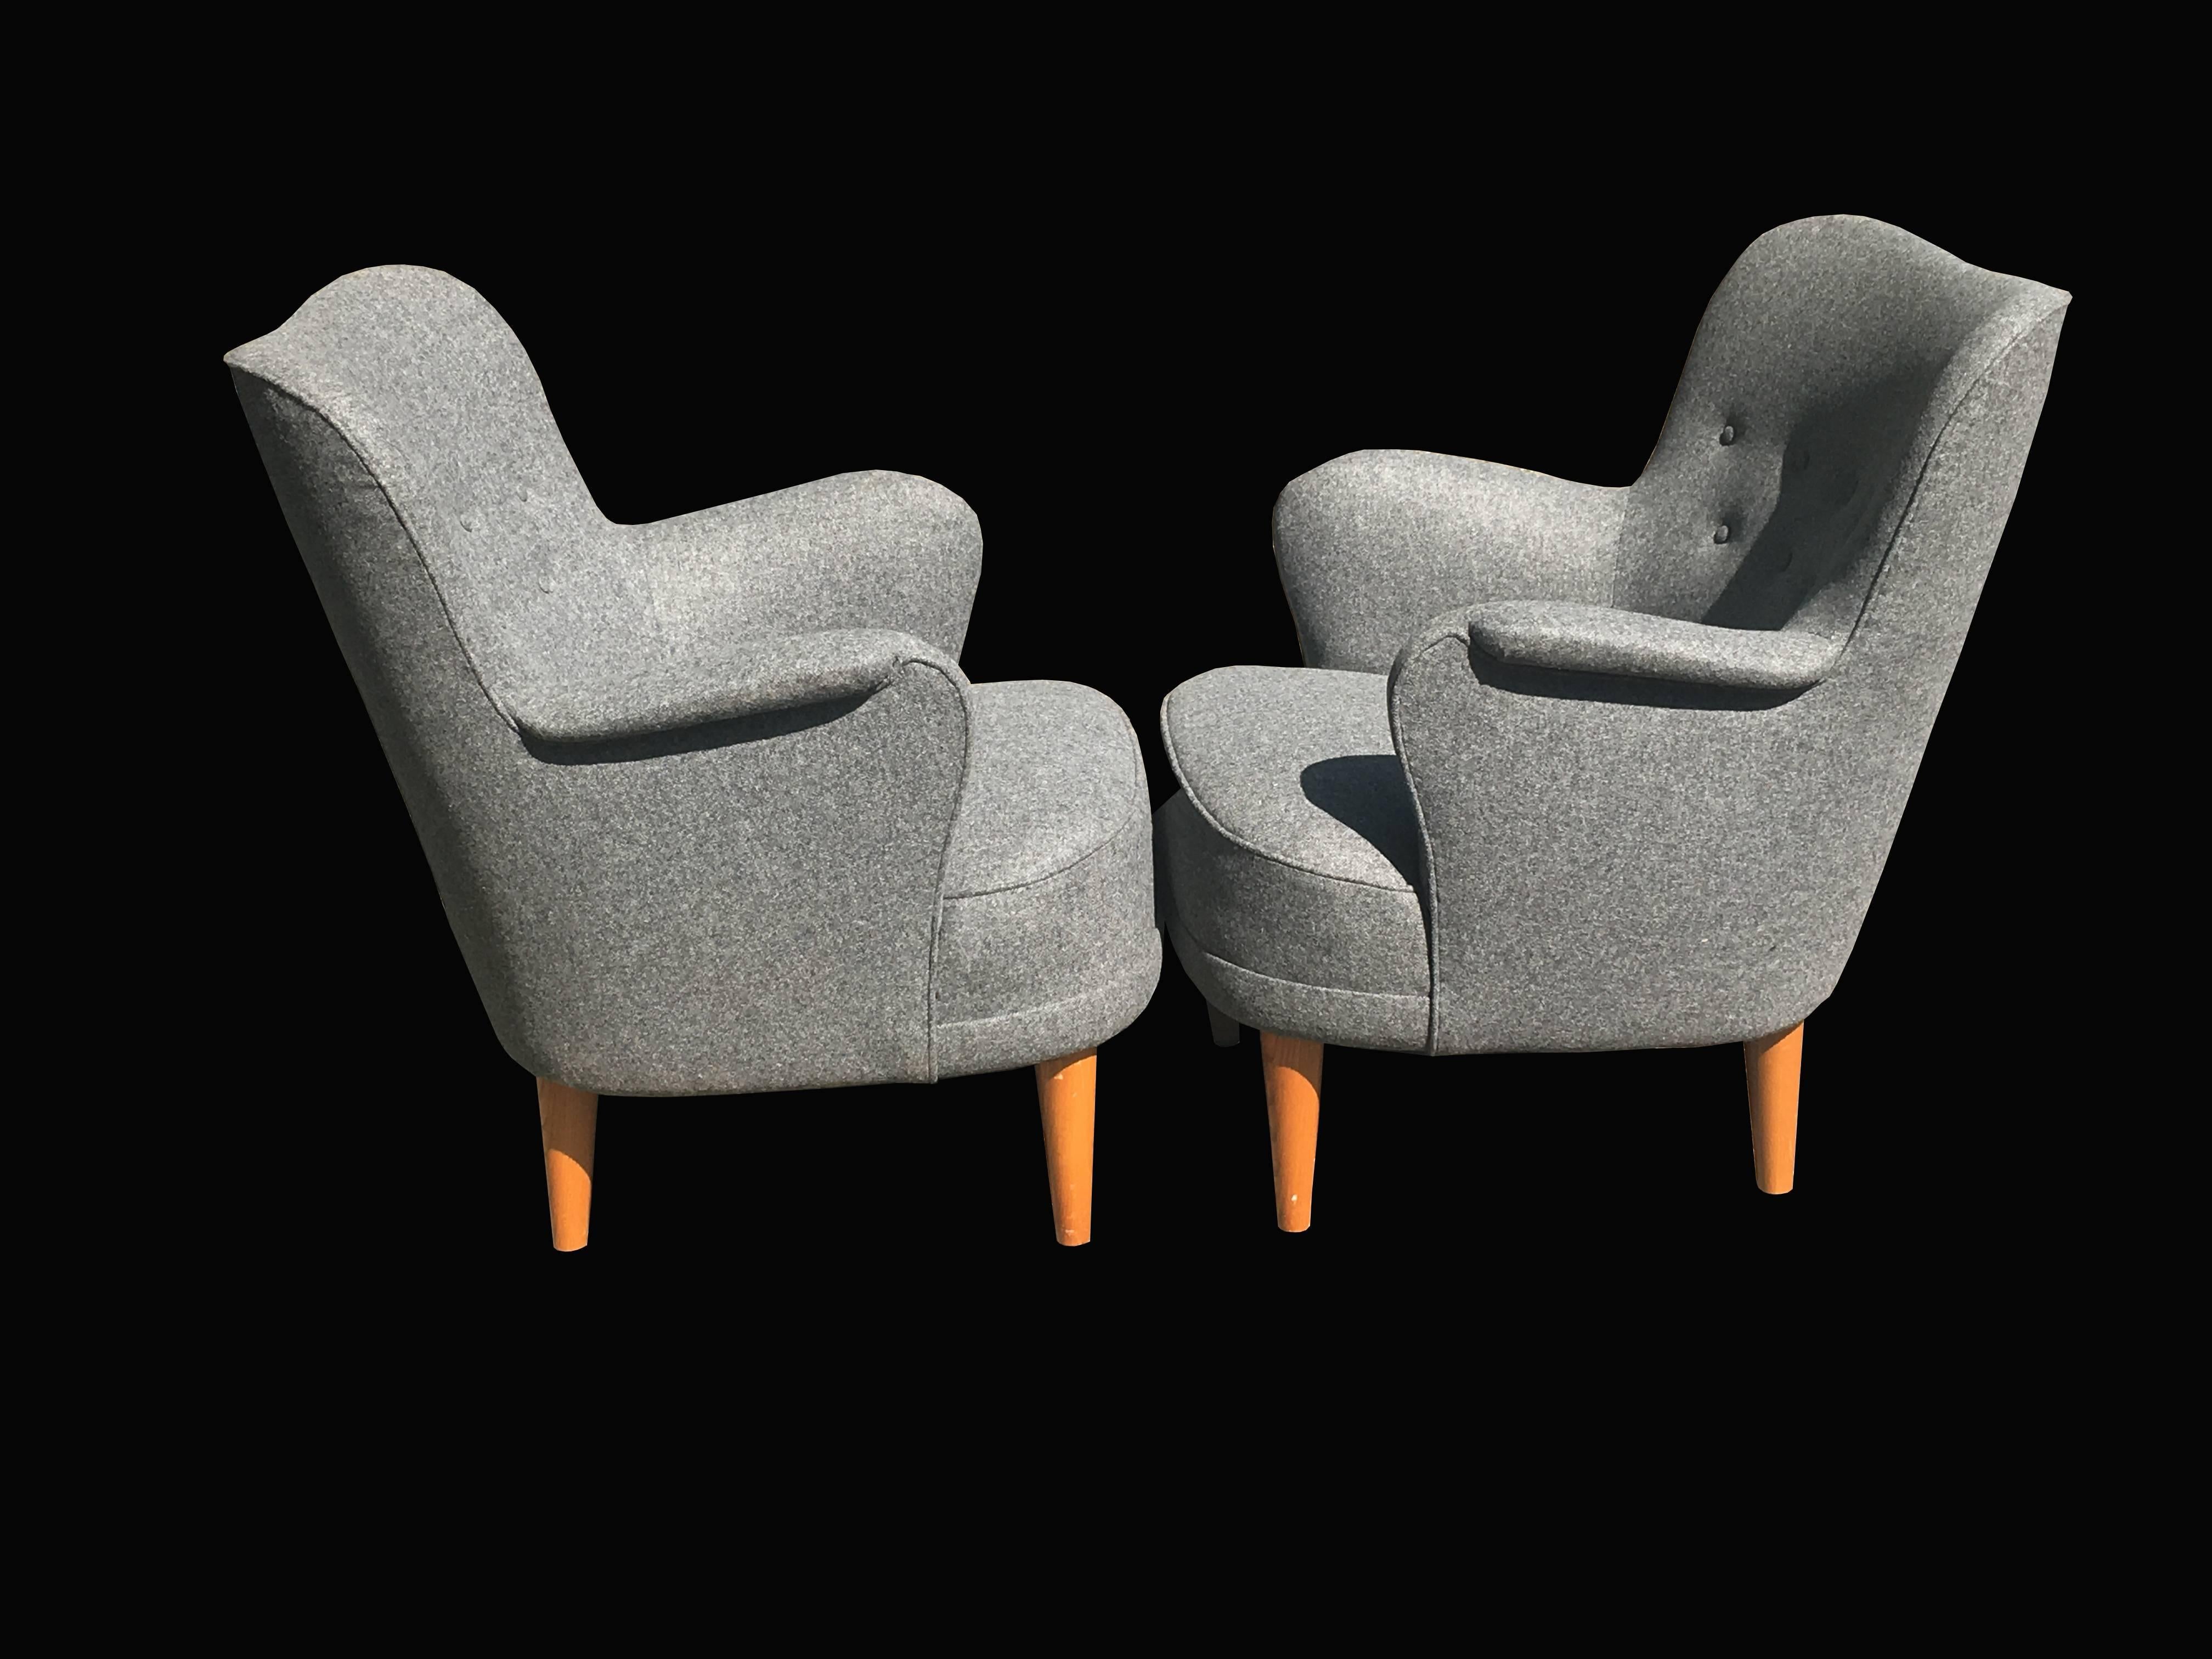 An immaculate fully restored pair of Samas arm/Lounge chairs, completely reupholstered in qulaity gray woolen fabric. bur keeping the original springs, hence super comfortable as well as super cool!
This pair of chairs are a match for the two and